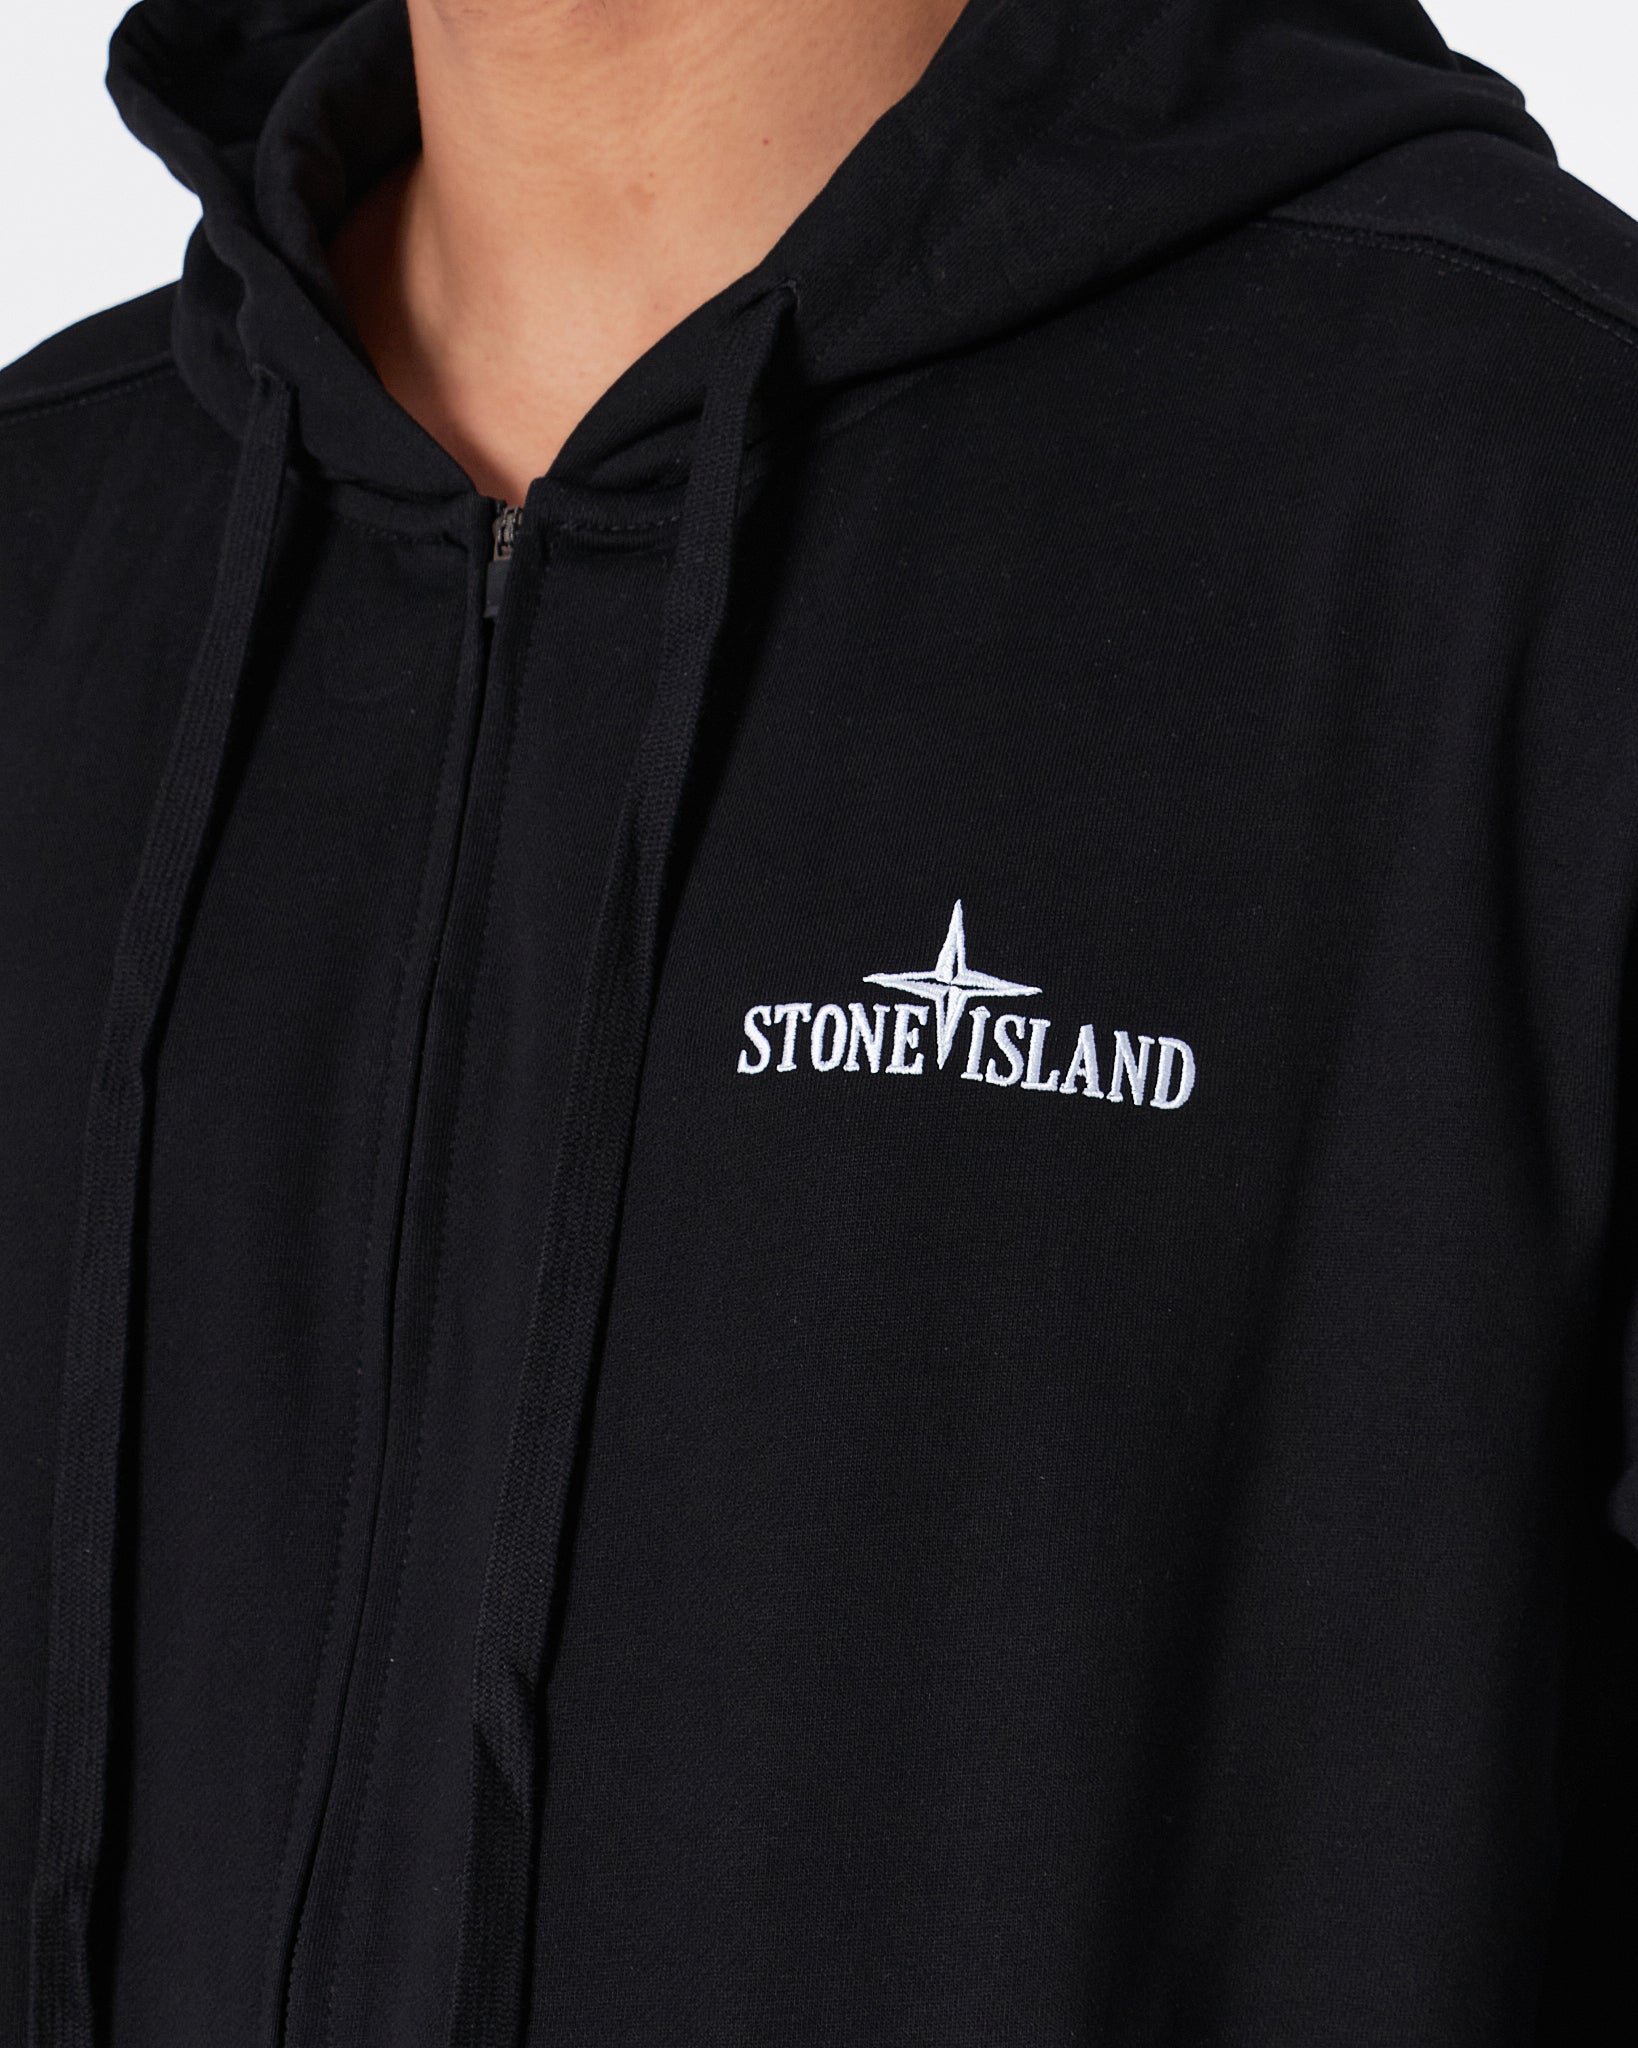 SIL Back Logo Embroidered Men Black Zipped Hoodie 39.90